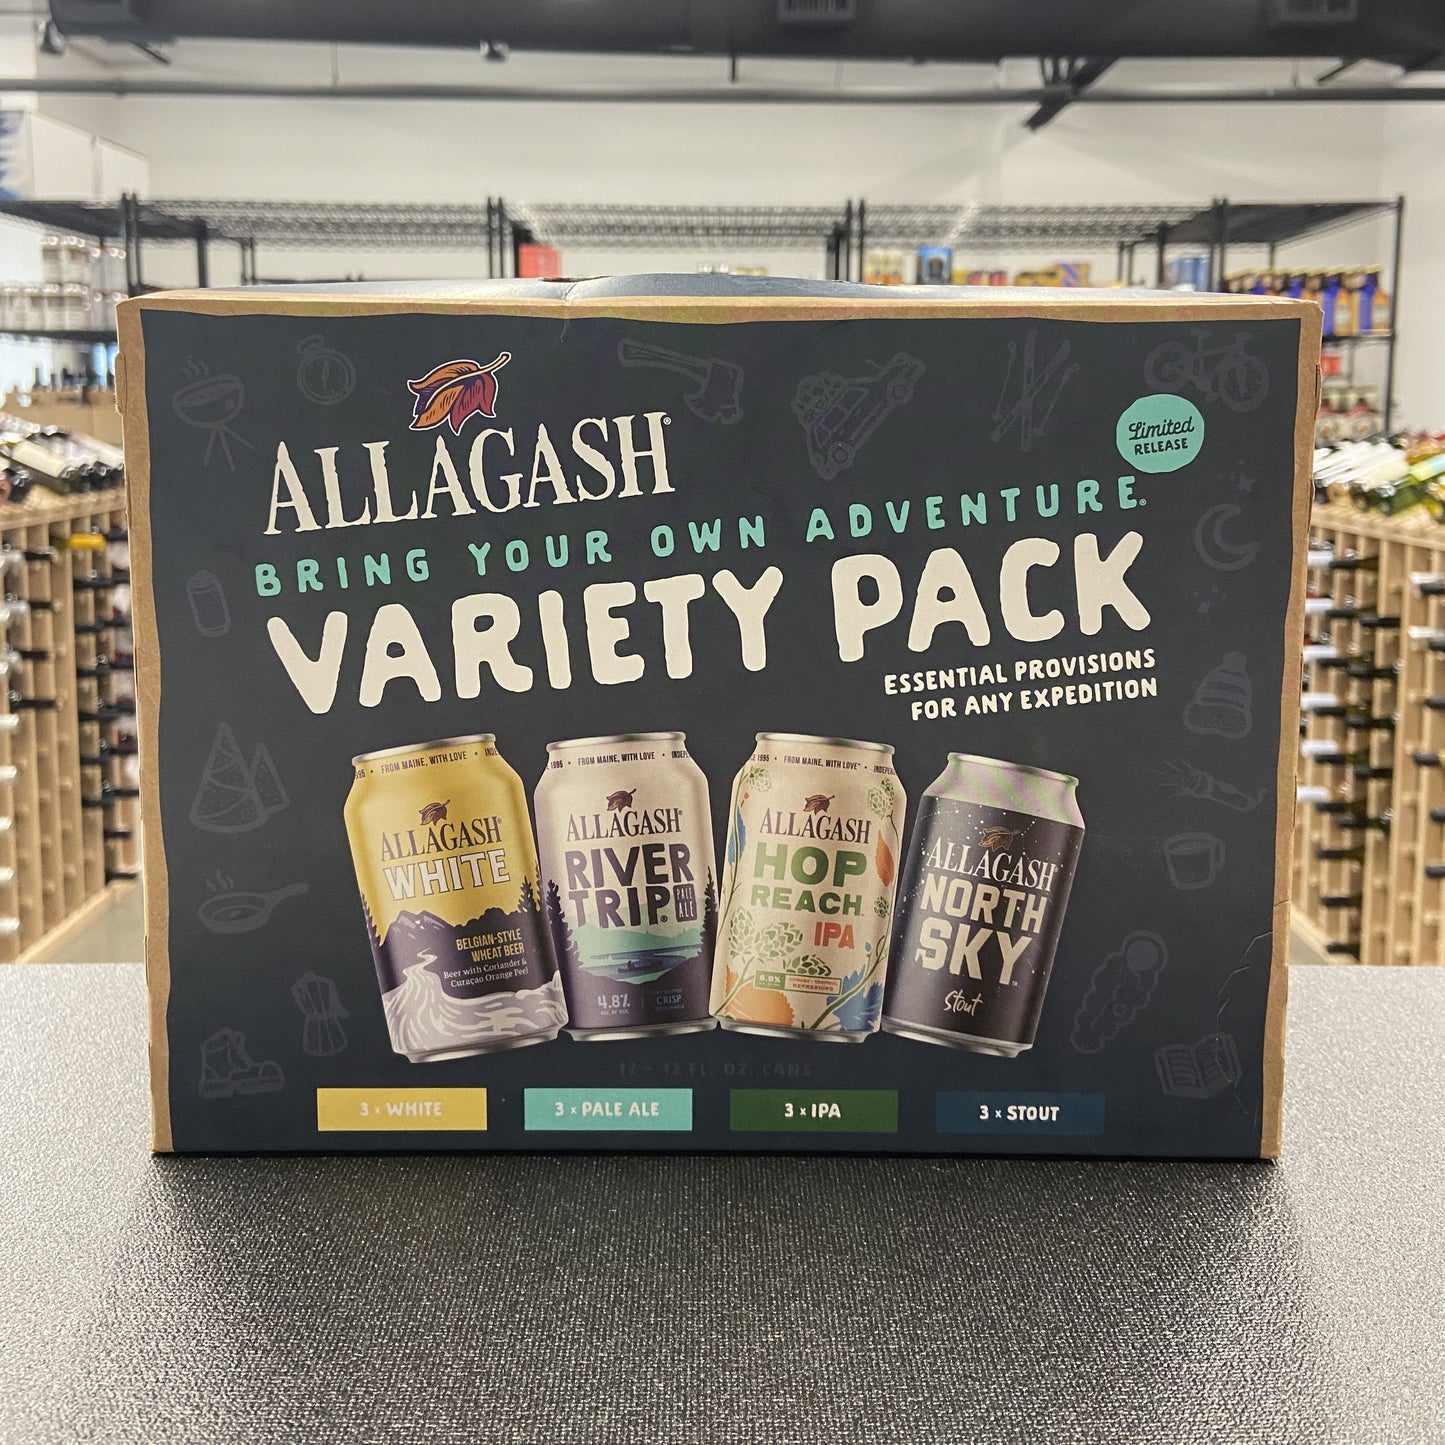 Allagash Bring Your Own Adventure Variety Pack